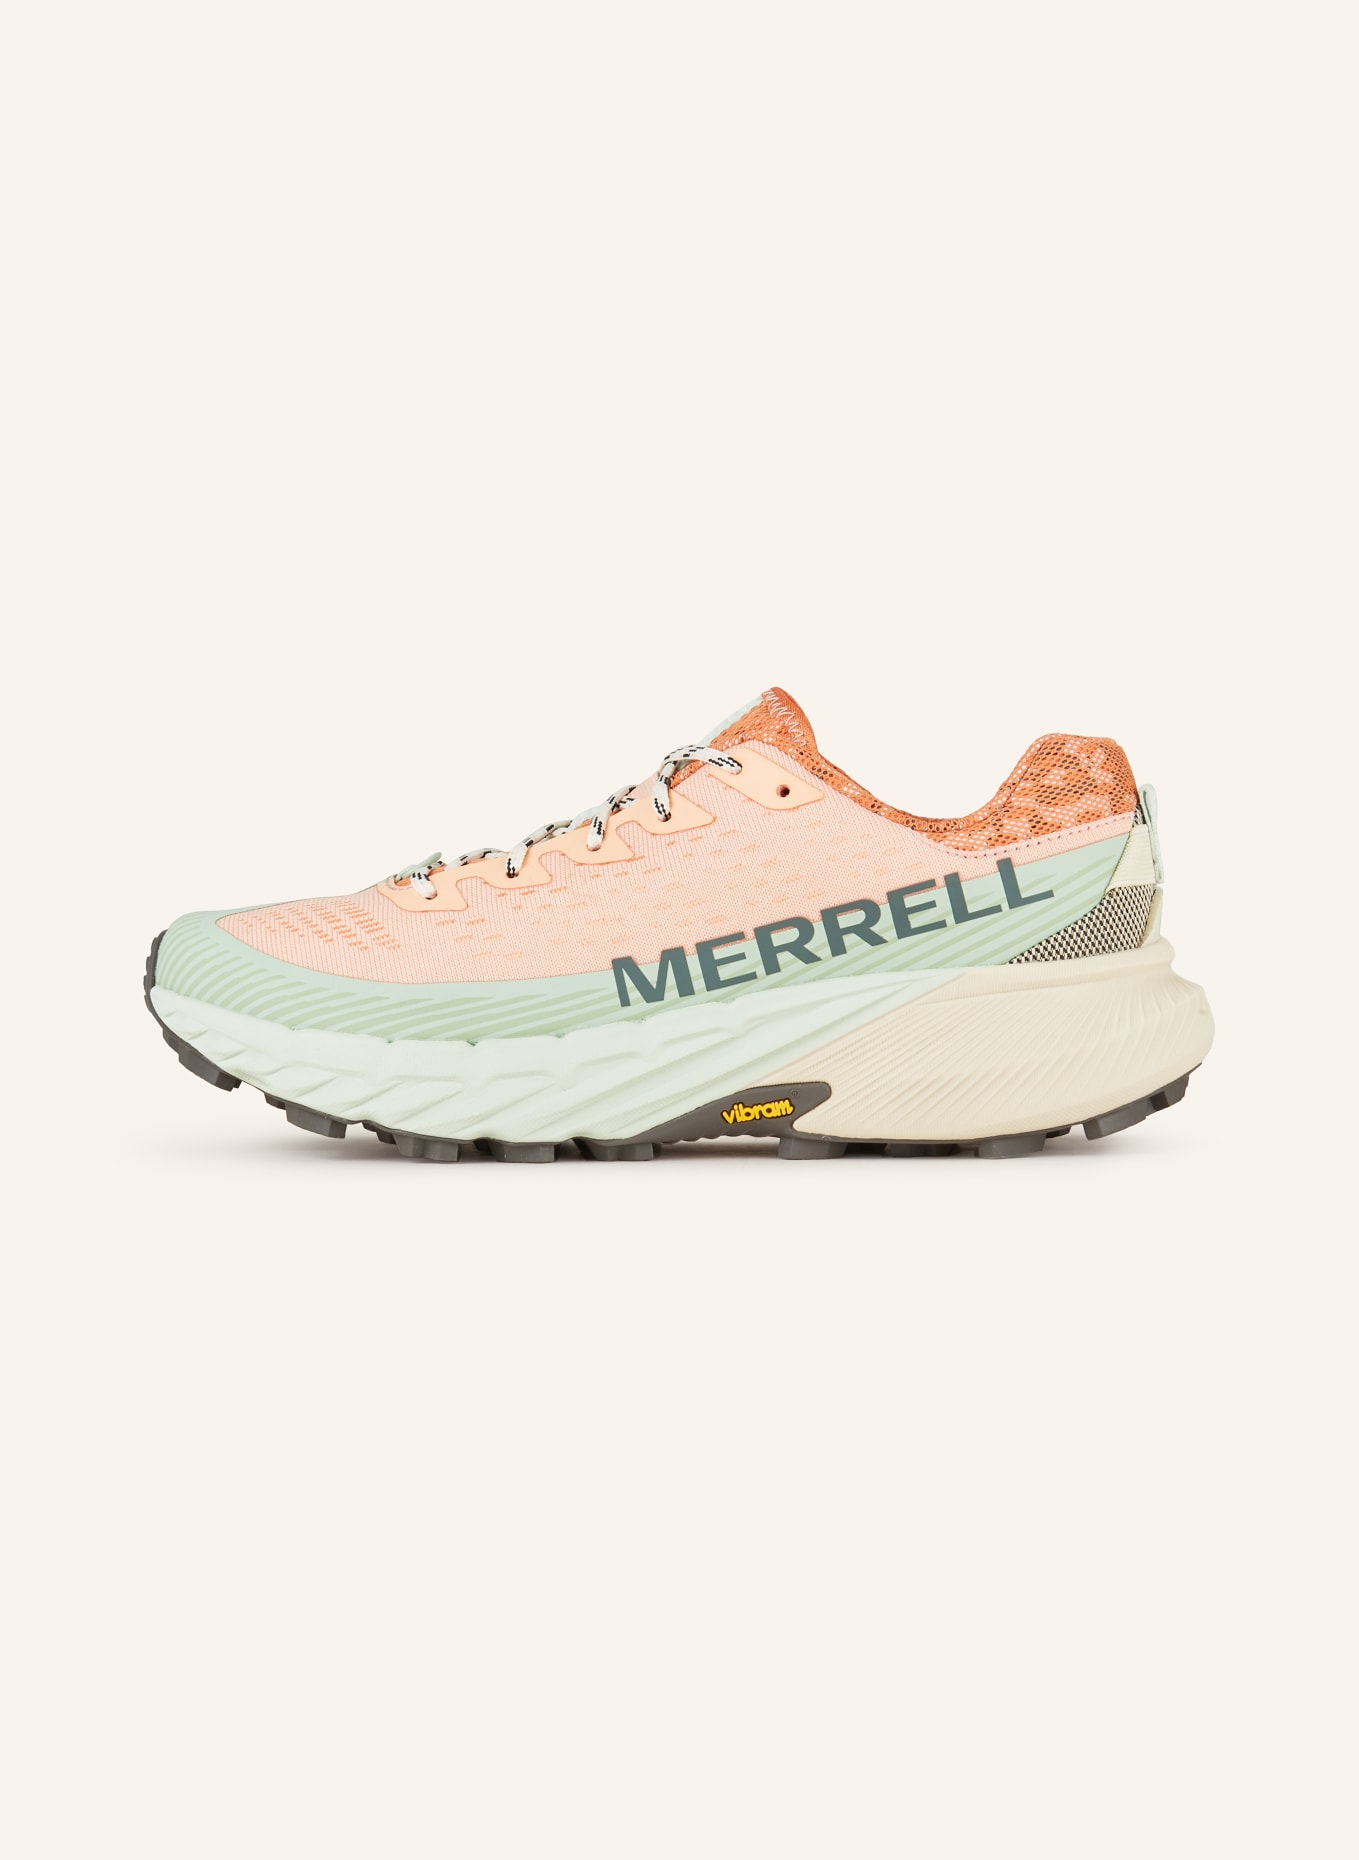 MERRELL Trail running shoes AGILITY PEAK 5, Color: SALMON/ MINT (Image 4)